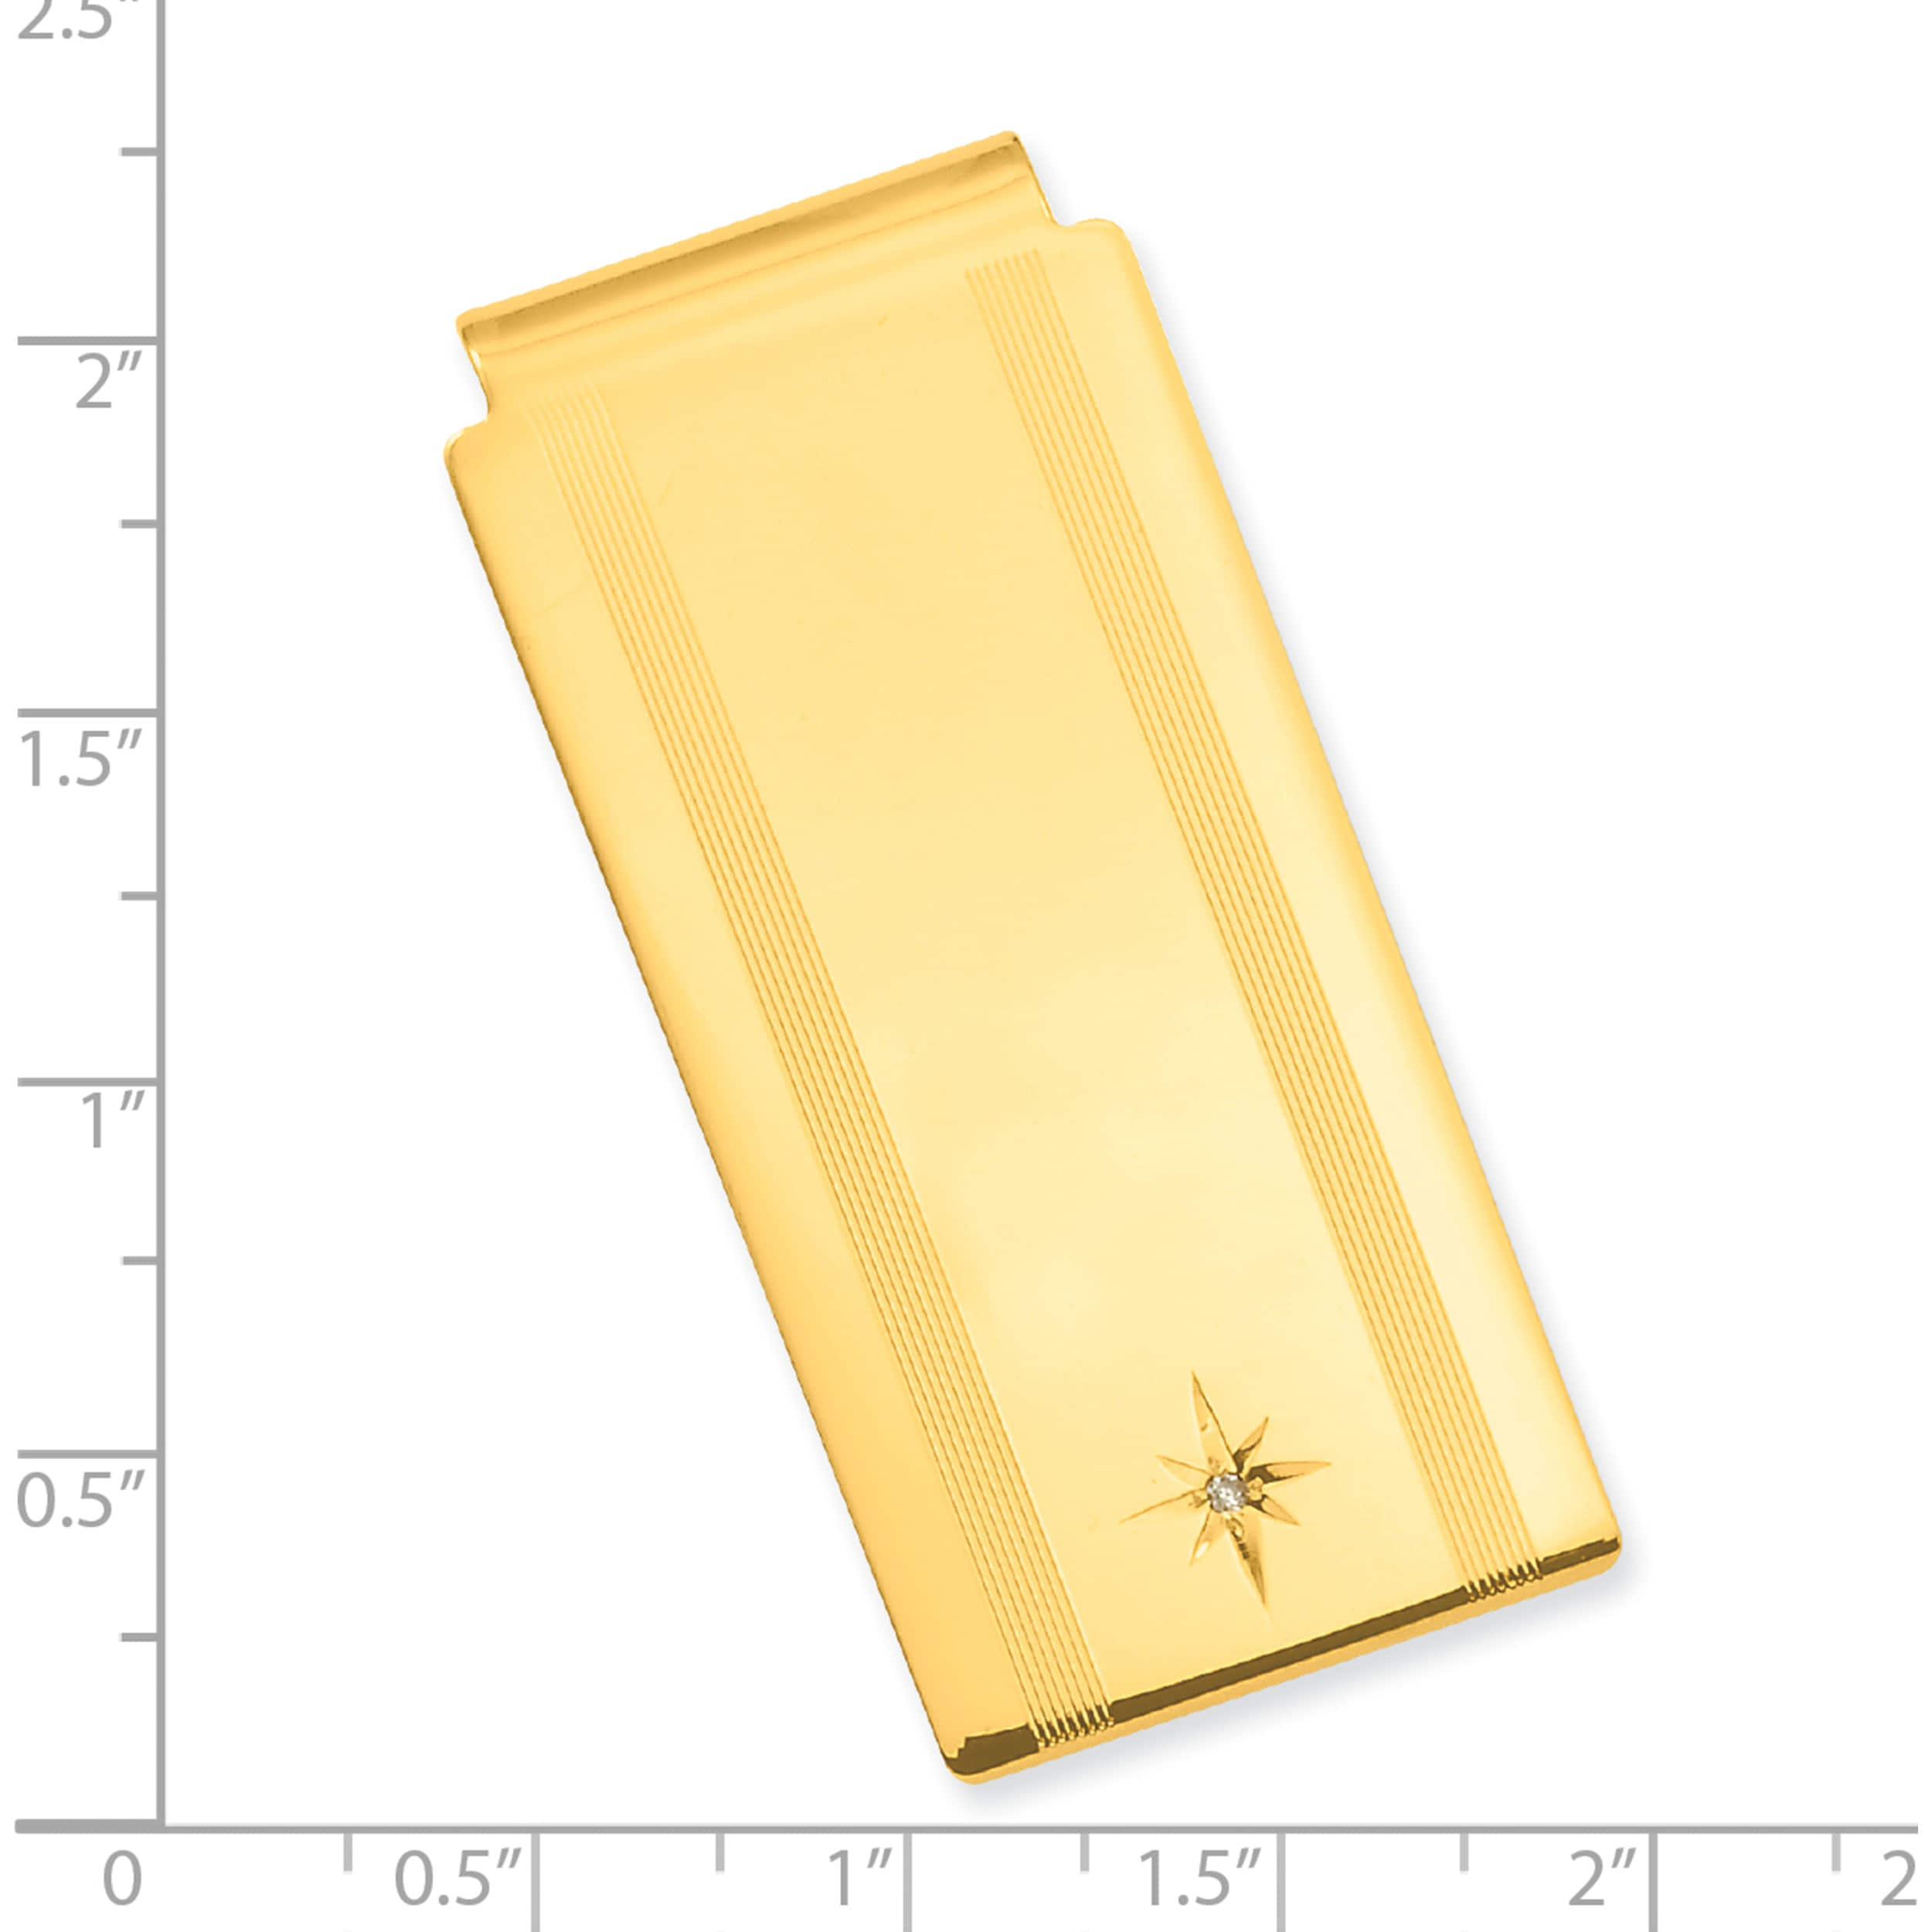 Fashion Gold-Plated Kelly Waters Star Cut .001Ct Diamond Hinged Money Clip (50 X 25) Made In United States gl8770 - image 3 of 5